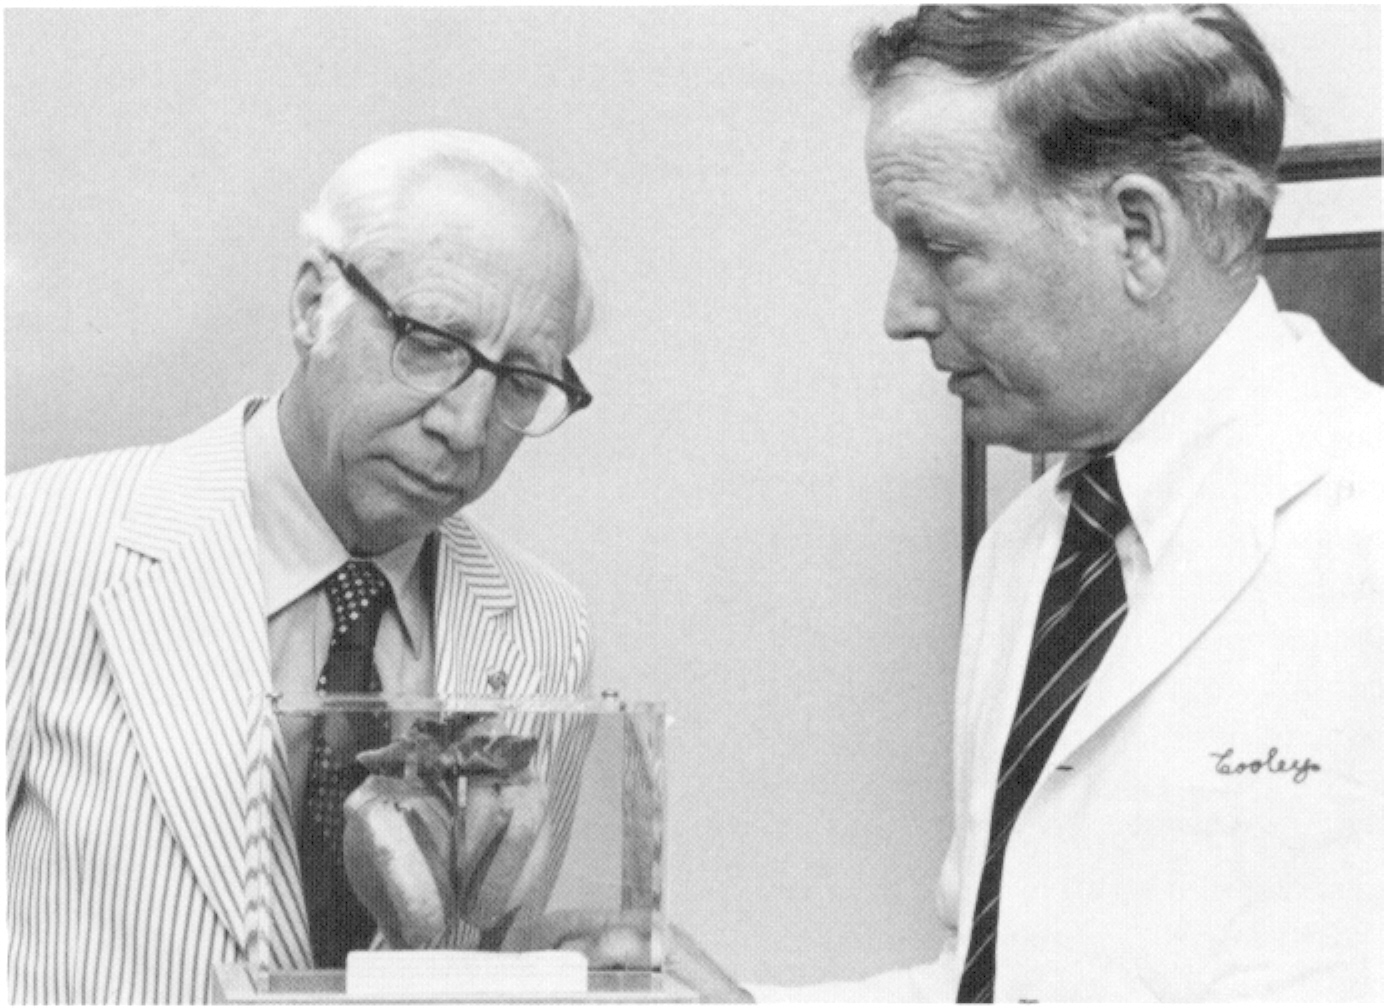 Dr. Willem Kolff and Dr. Denton Cooley with the Liotta Total Artificial Heart, first implanted successfully as a bridge-to-transplant in 1969